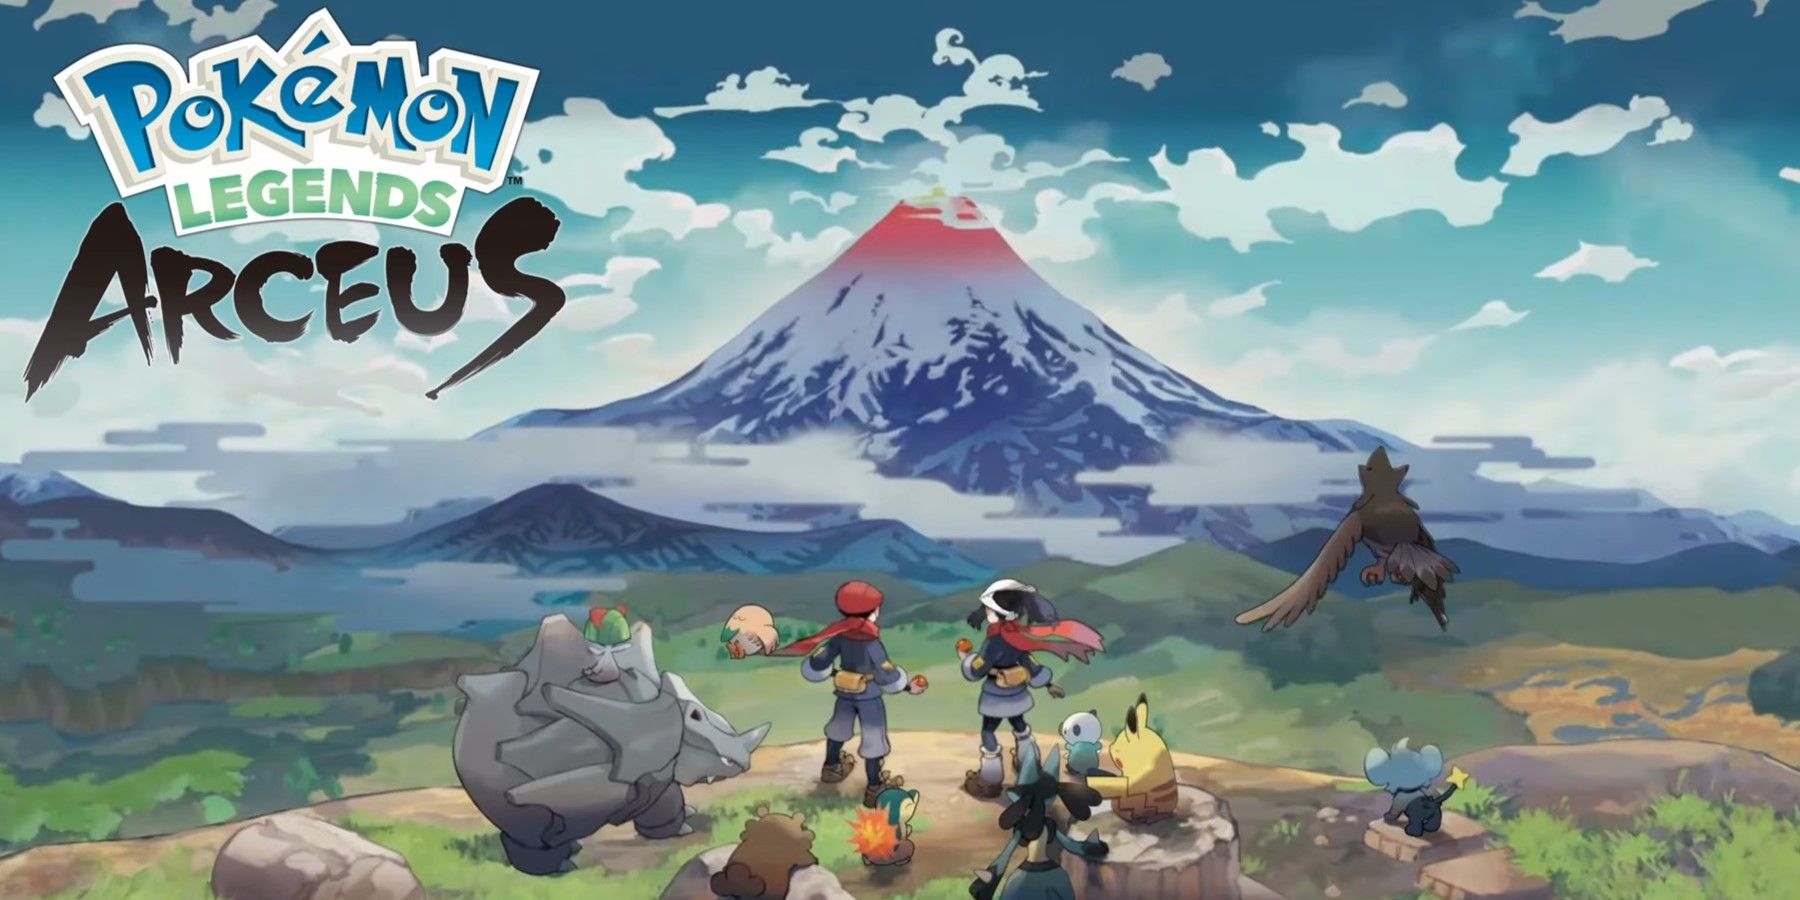 The Pokemon character is displaying the title screen for Pokemon Legends Arceus.